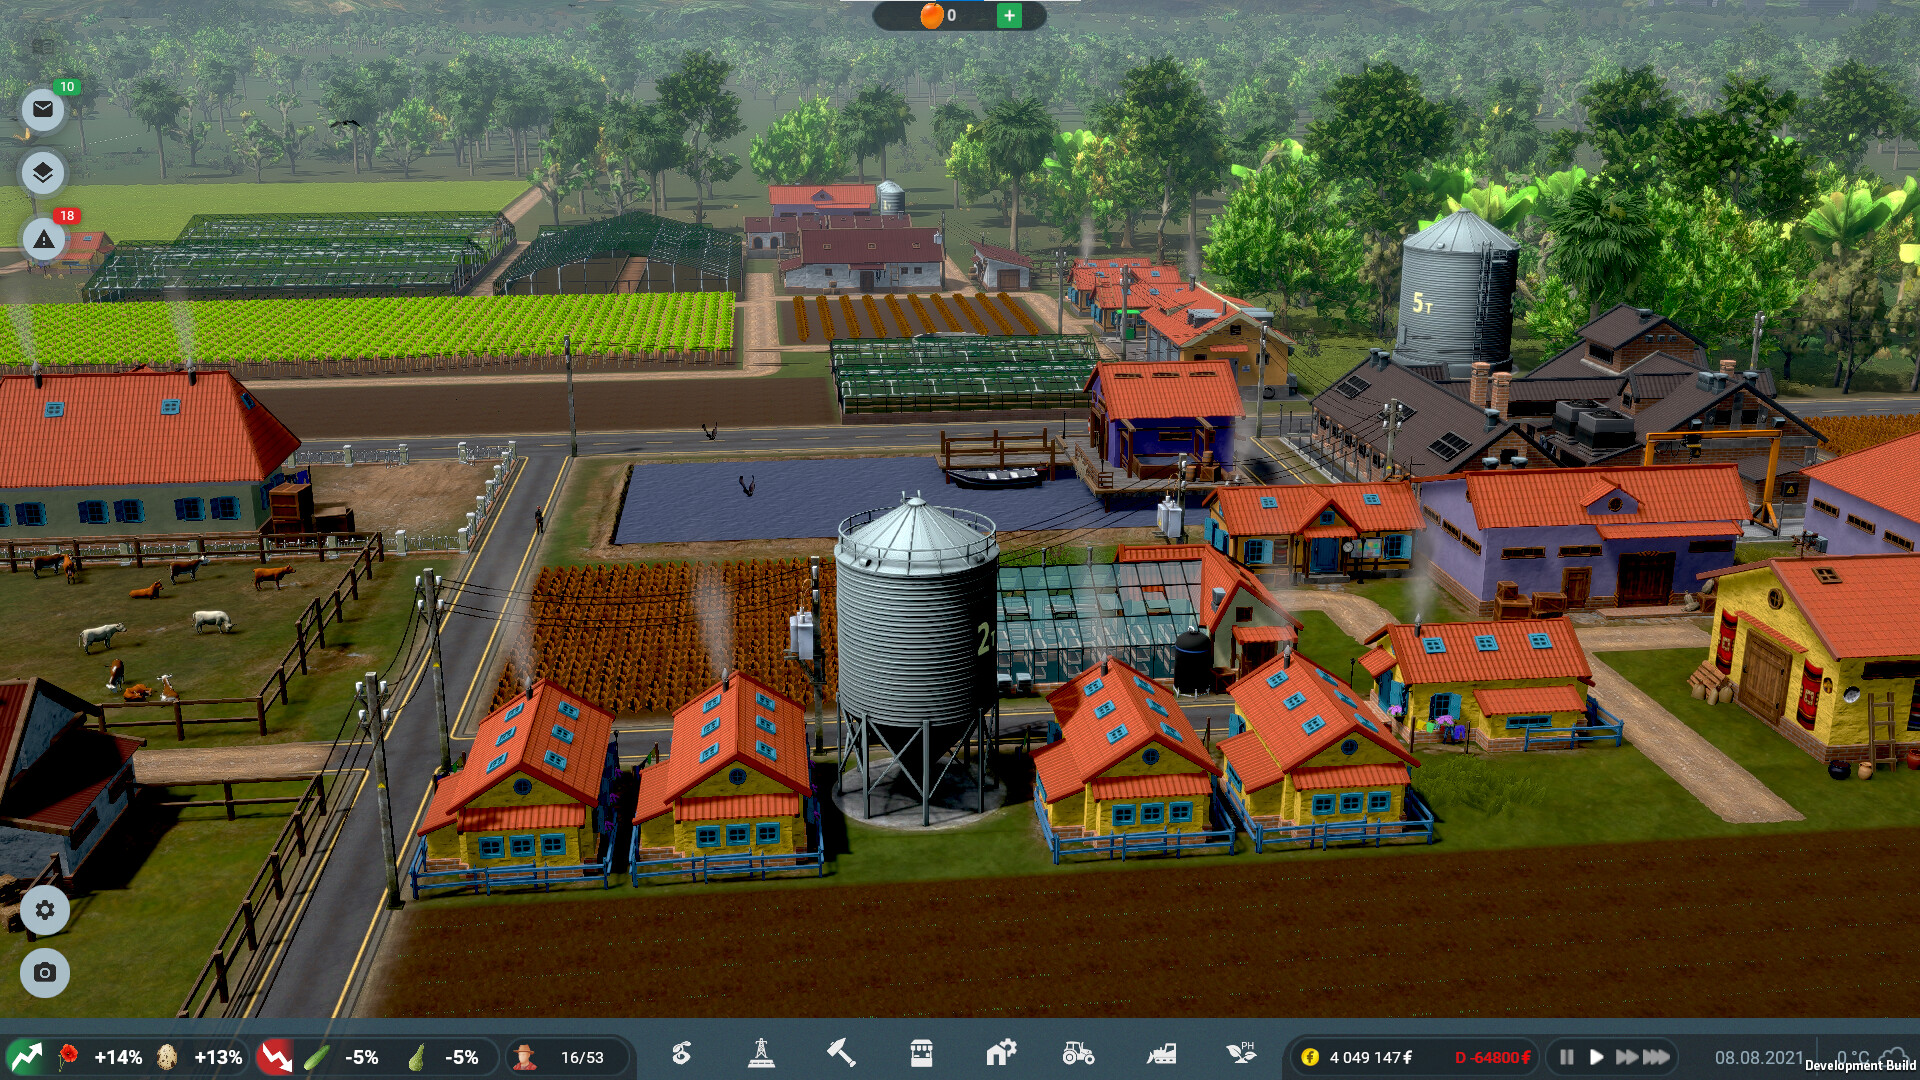 Farm Manager 2022 is the second instalment of popular farming